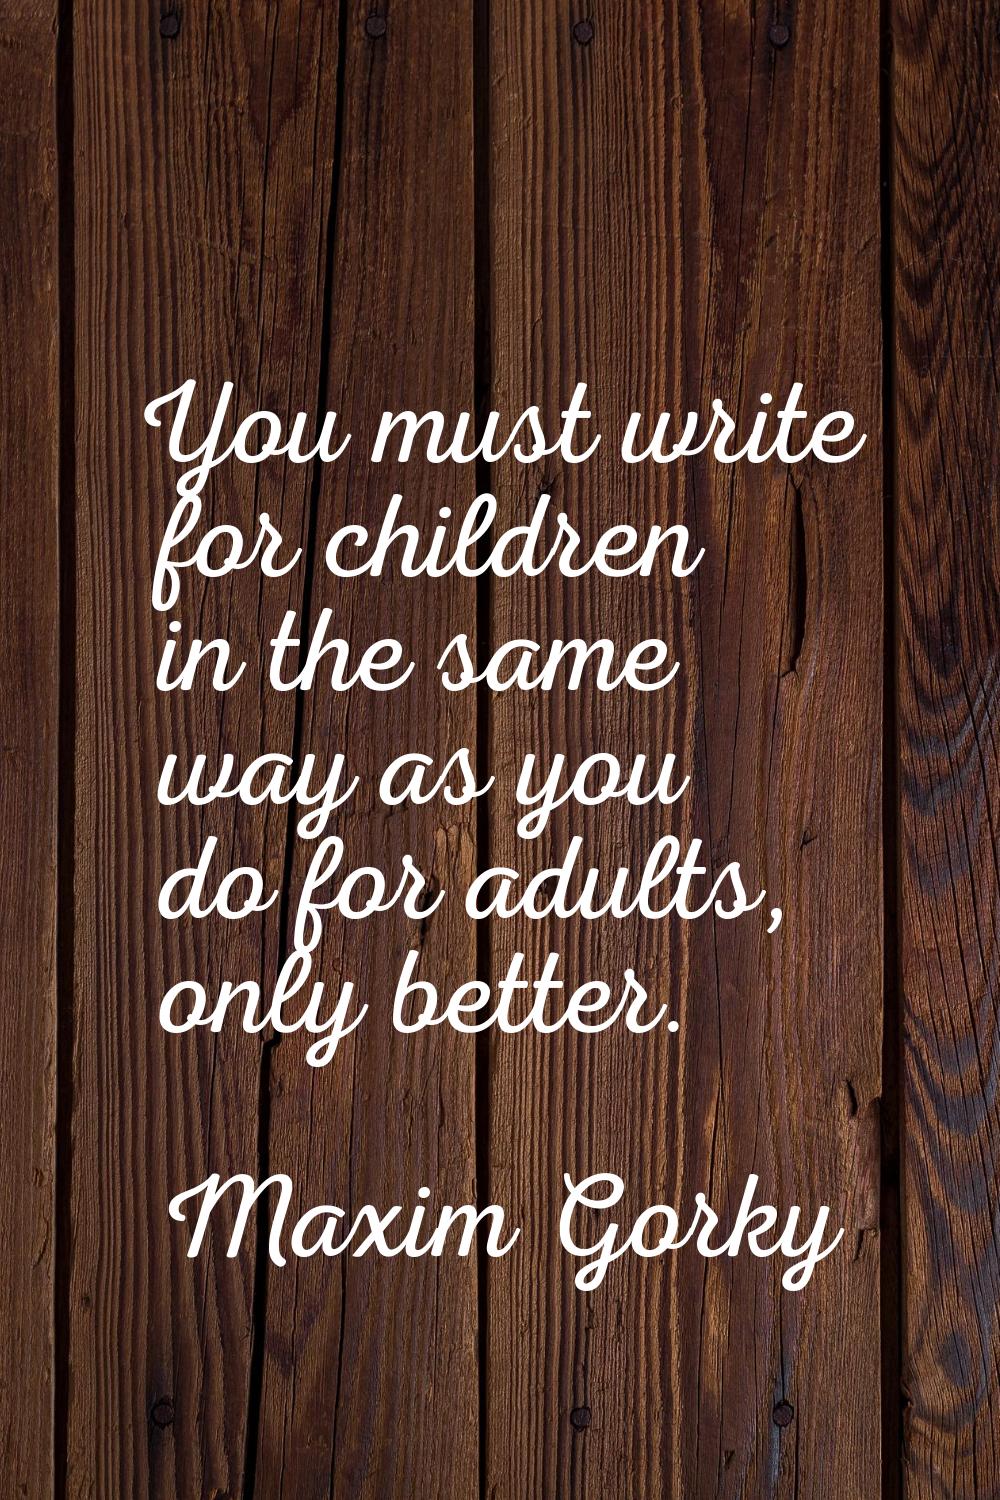 You must write for children in the same way as you do for adults, only better.